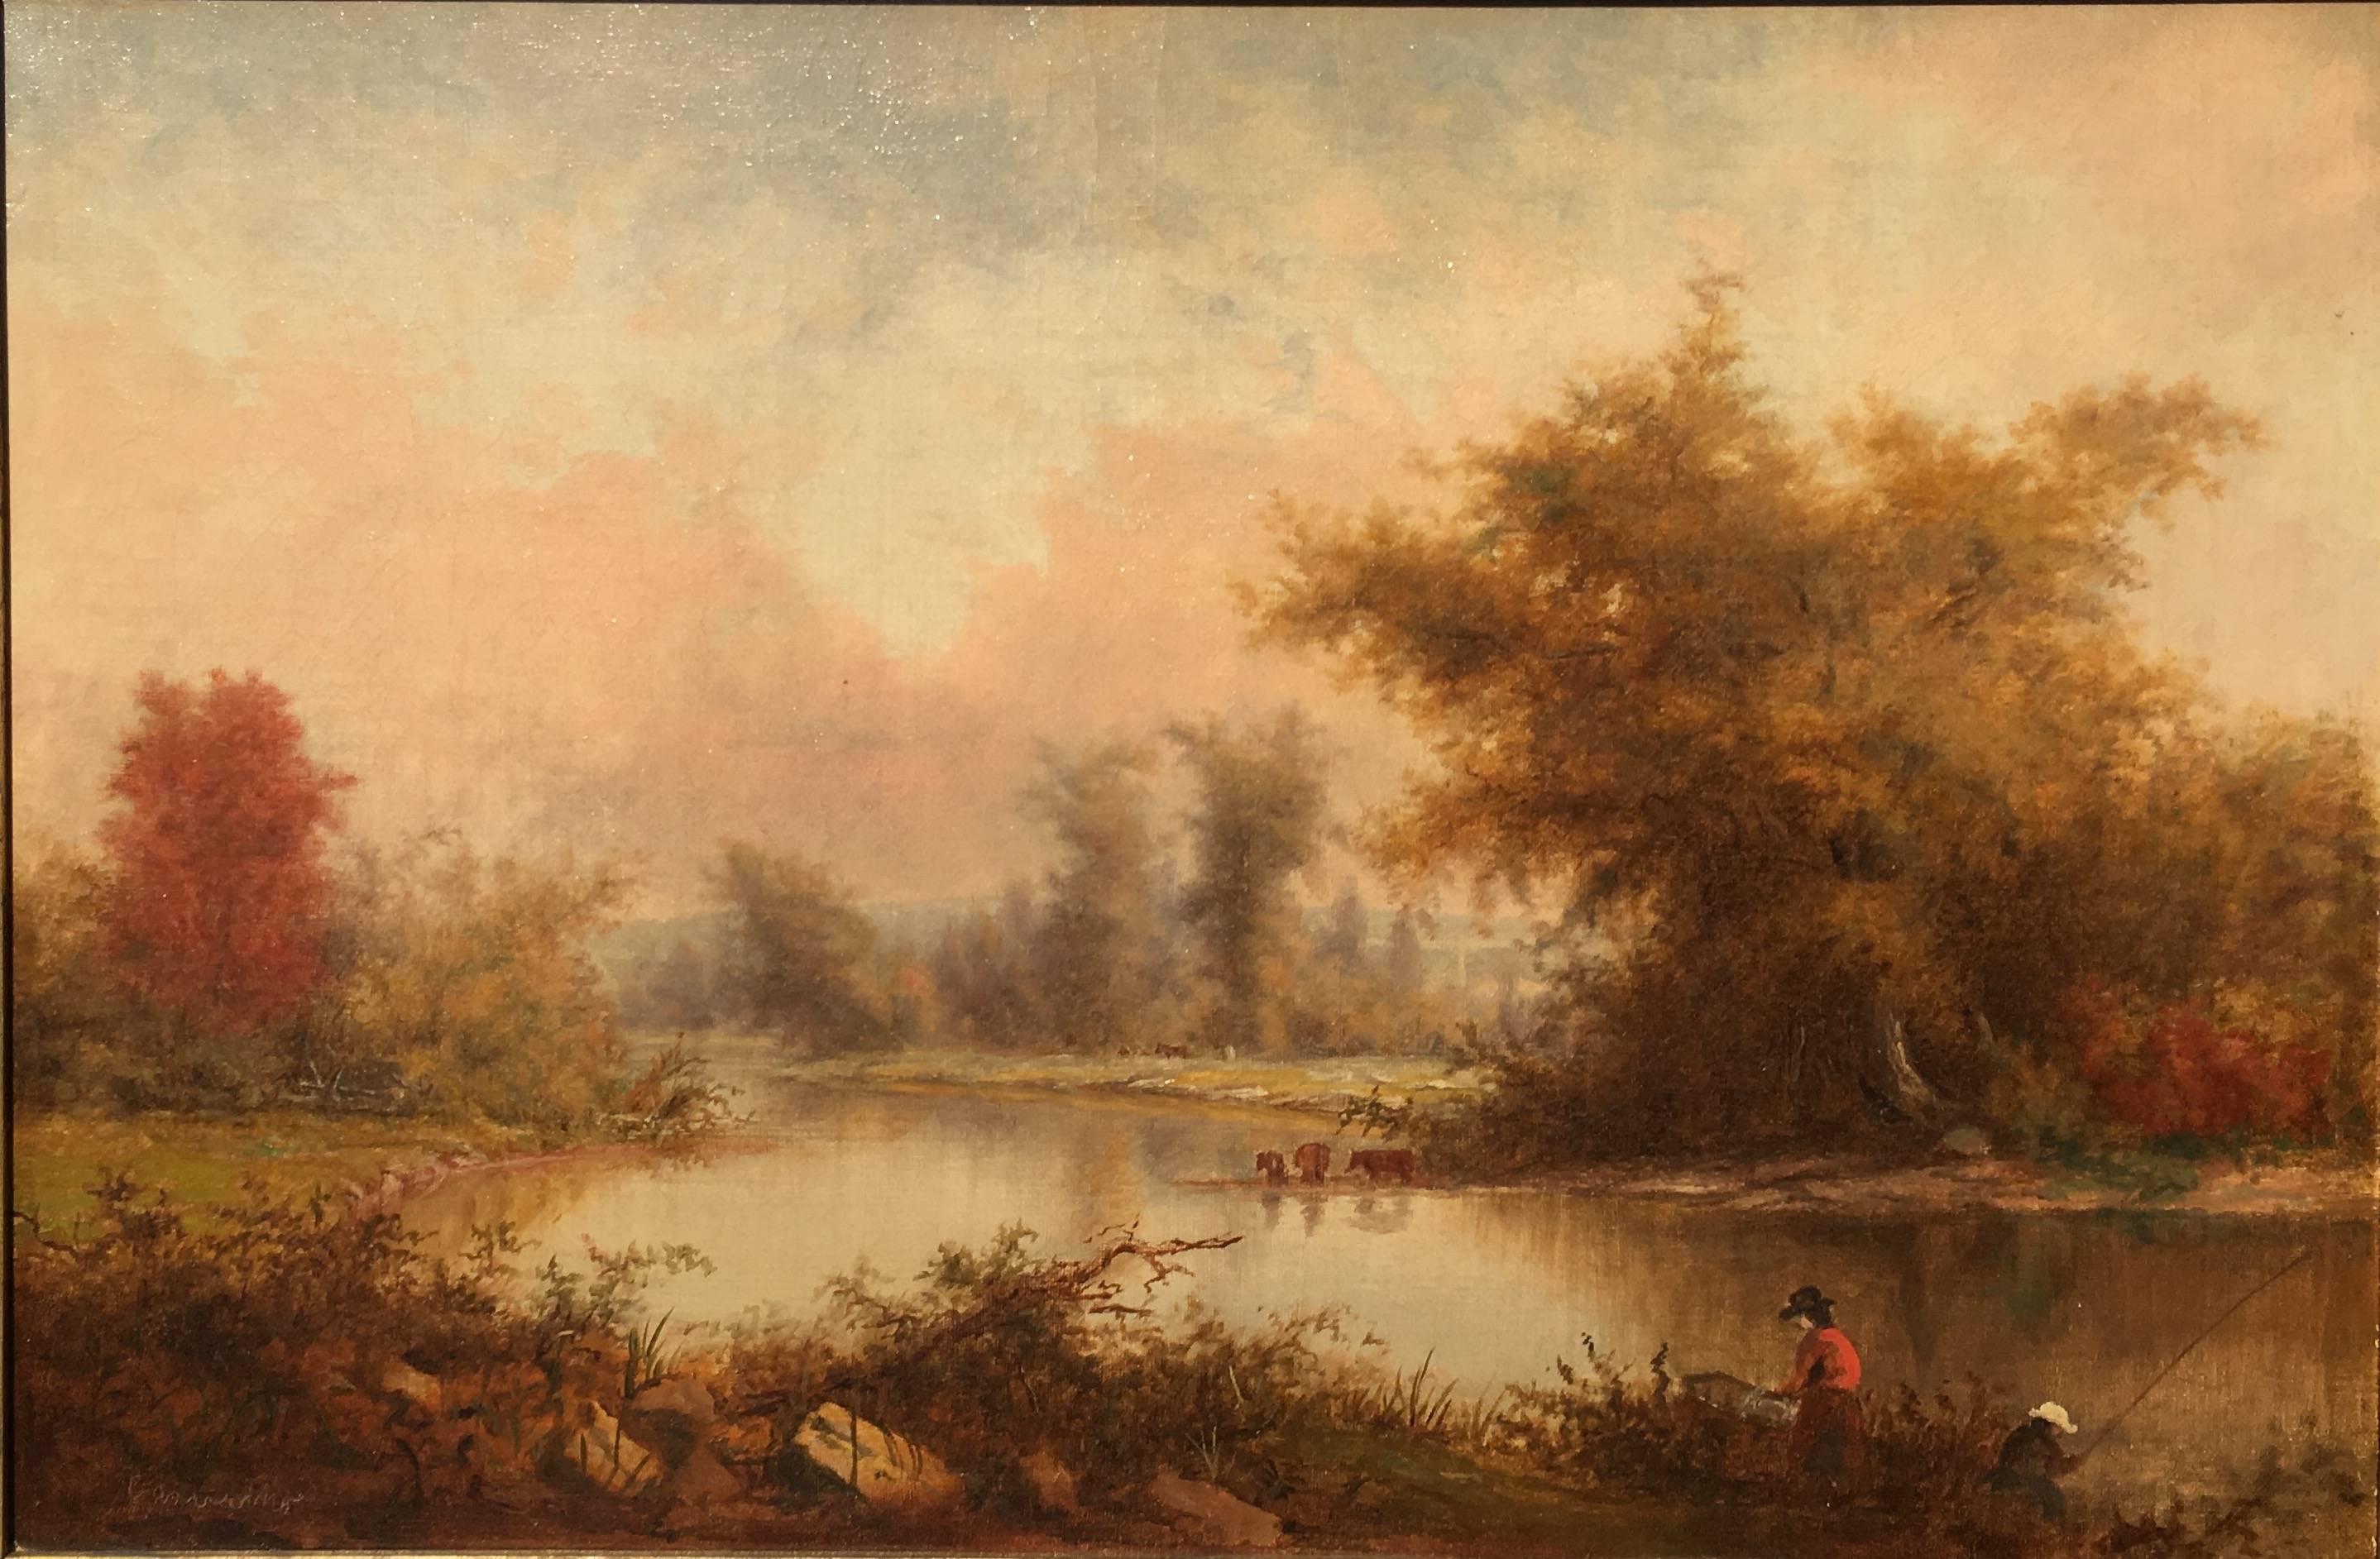 Solomom Carvahlo Landscape Painting - Autumn Fishing by the Lake